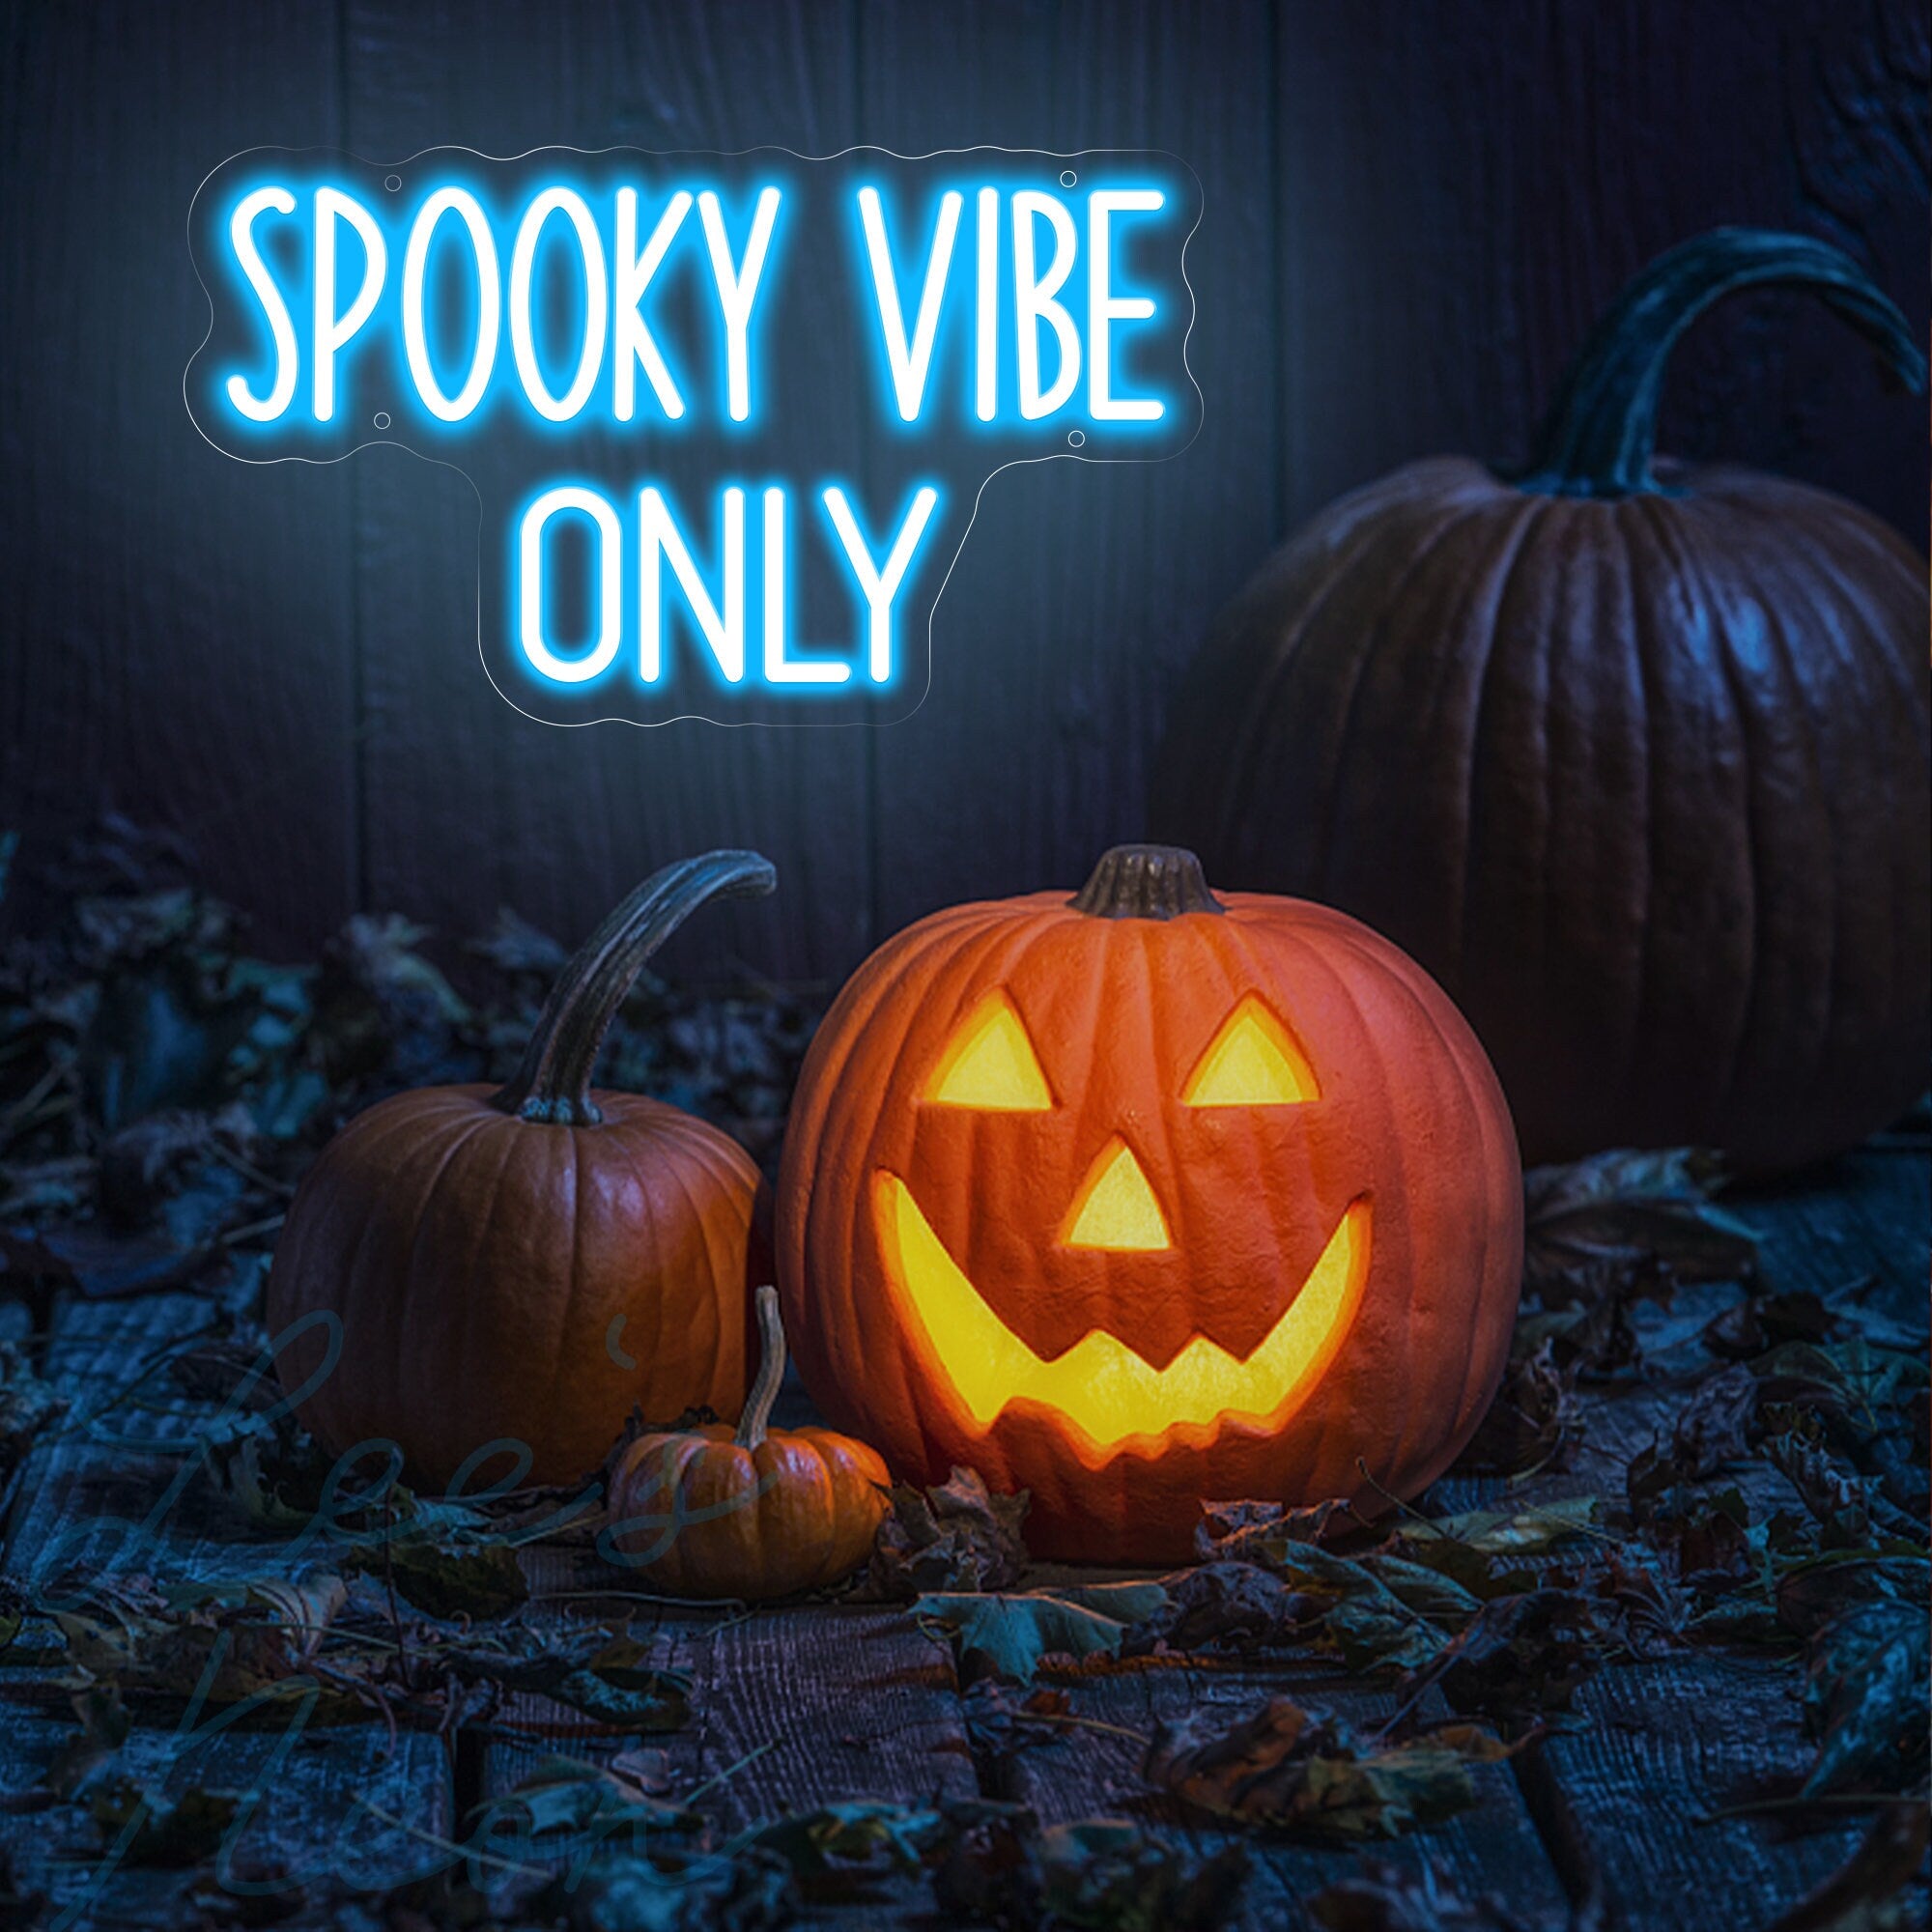 NEONIP-100% Handmade Spooky Vibe Only Neon Sign Halloween Event Light Up Sign Decor